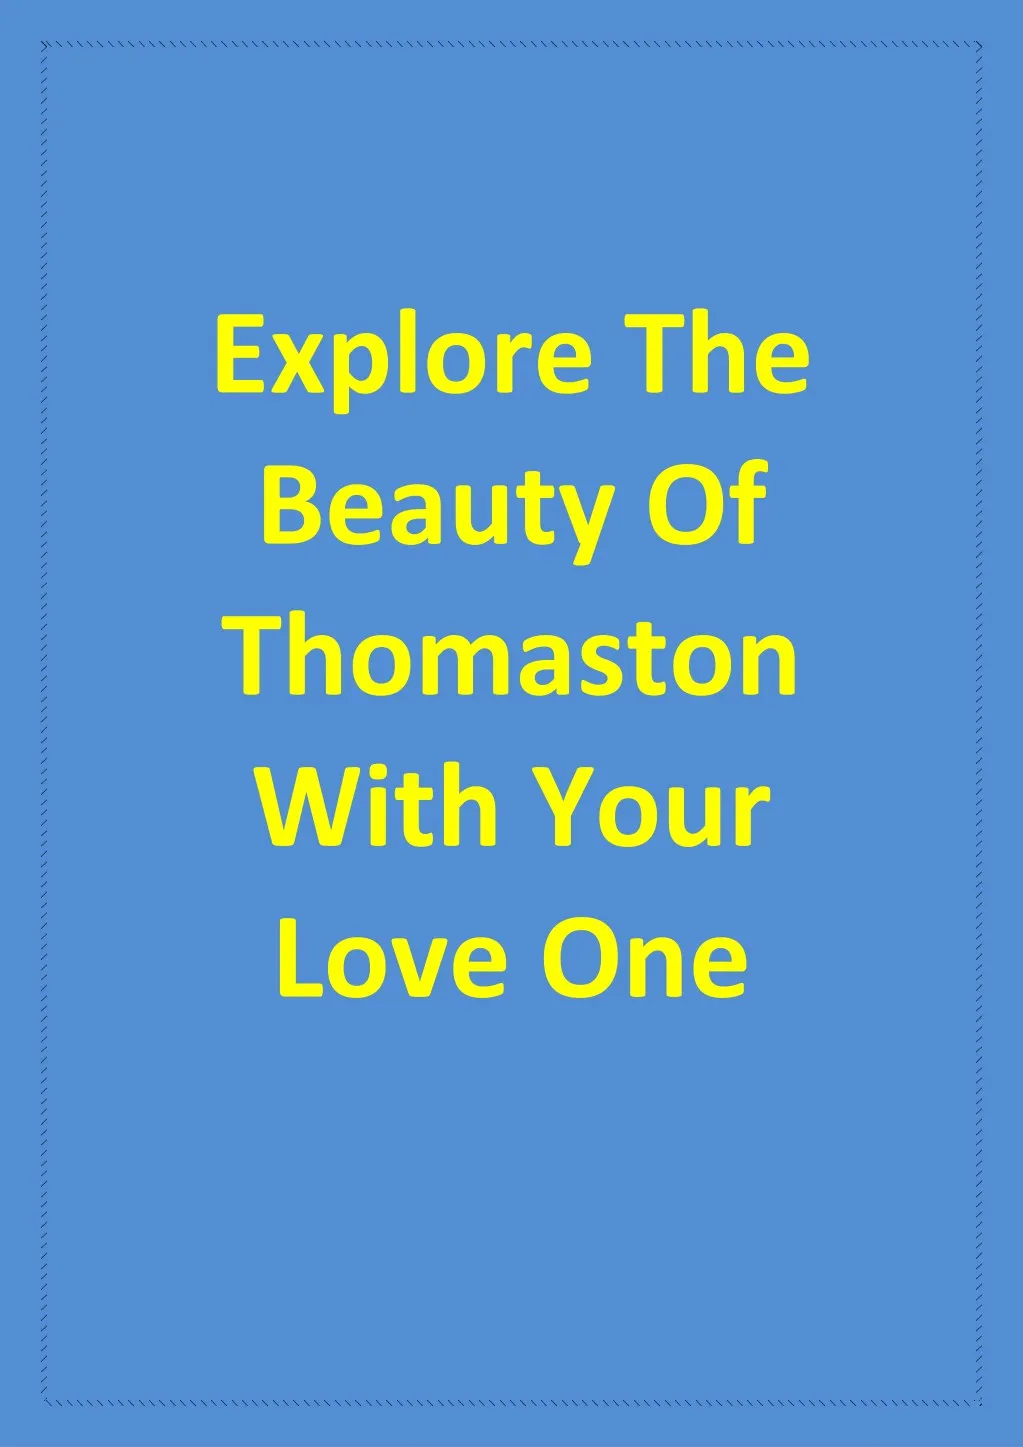 explore the beauty of thomaston with your love one